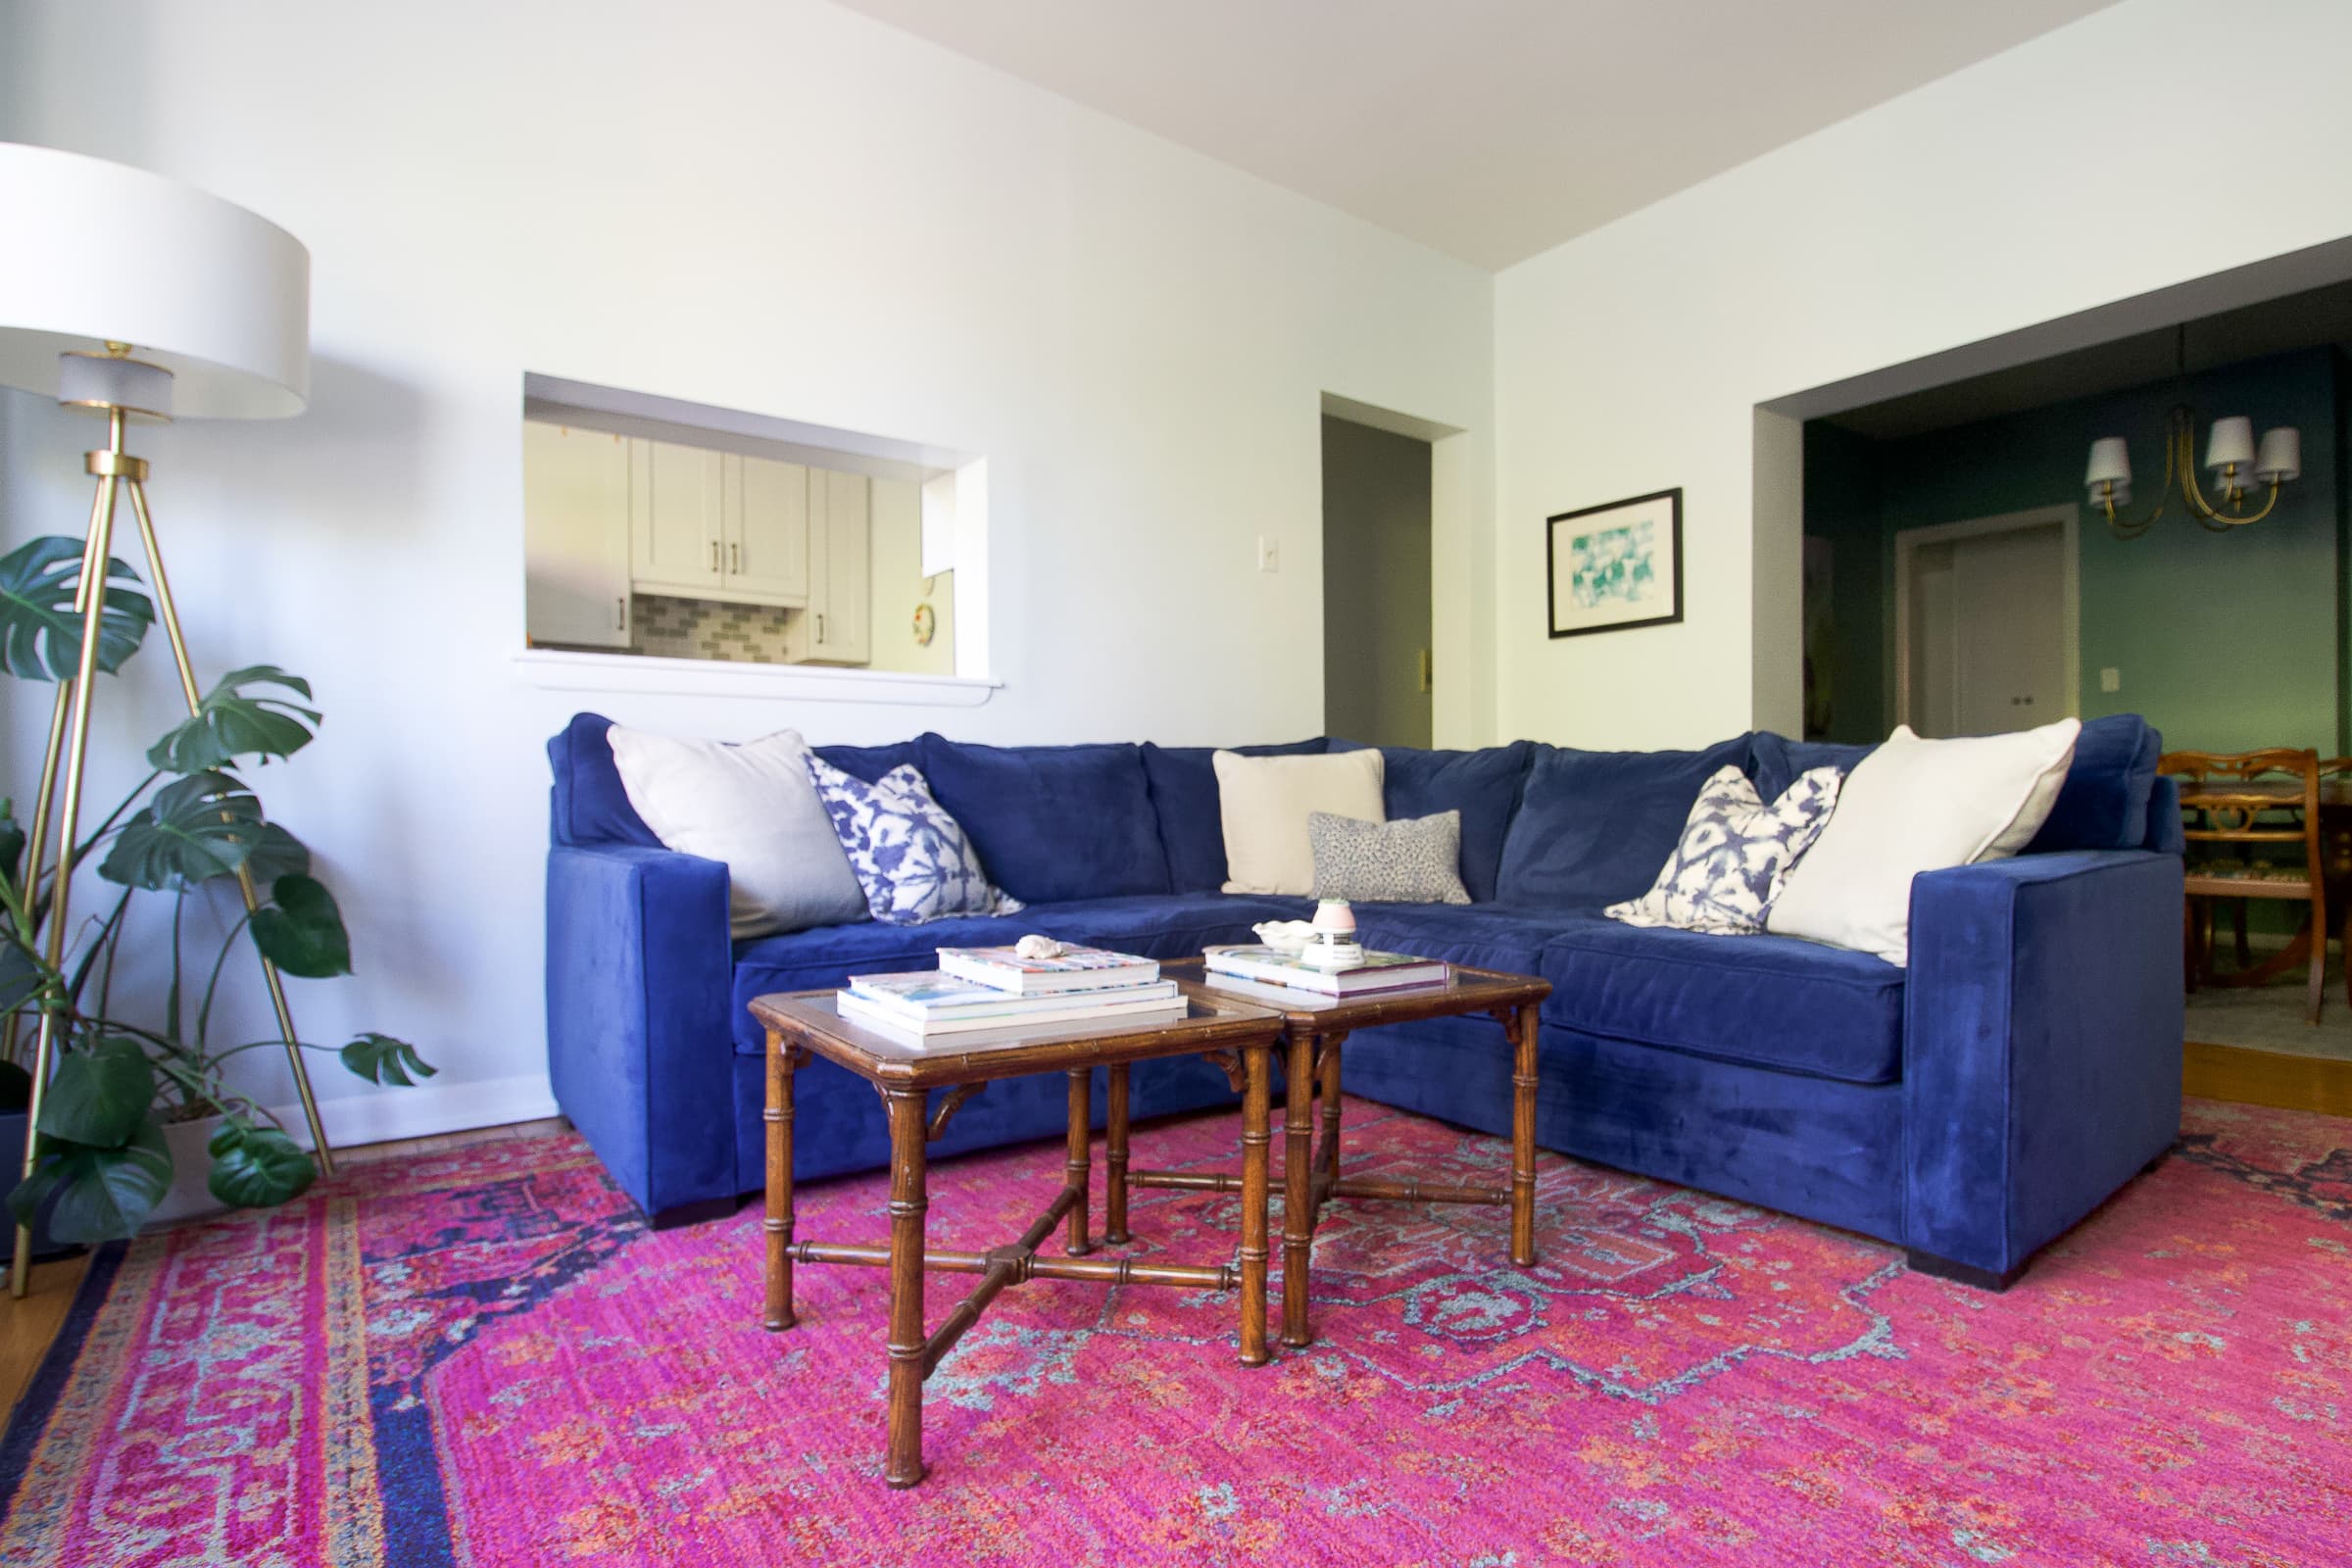 A navy living room couch in this colorful condo